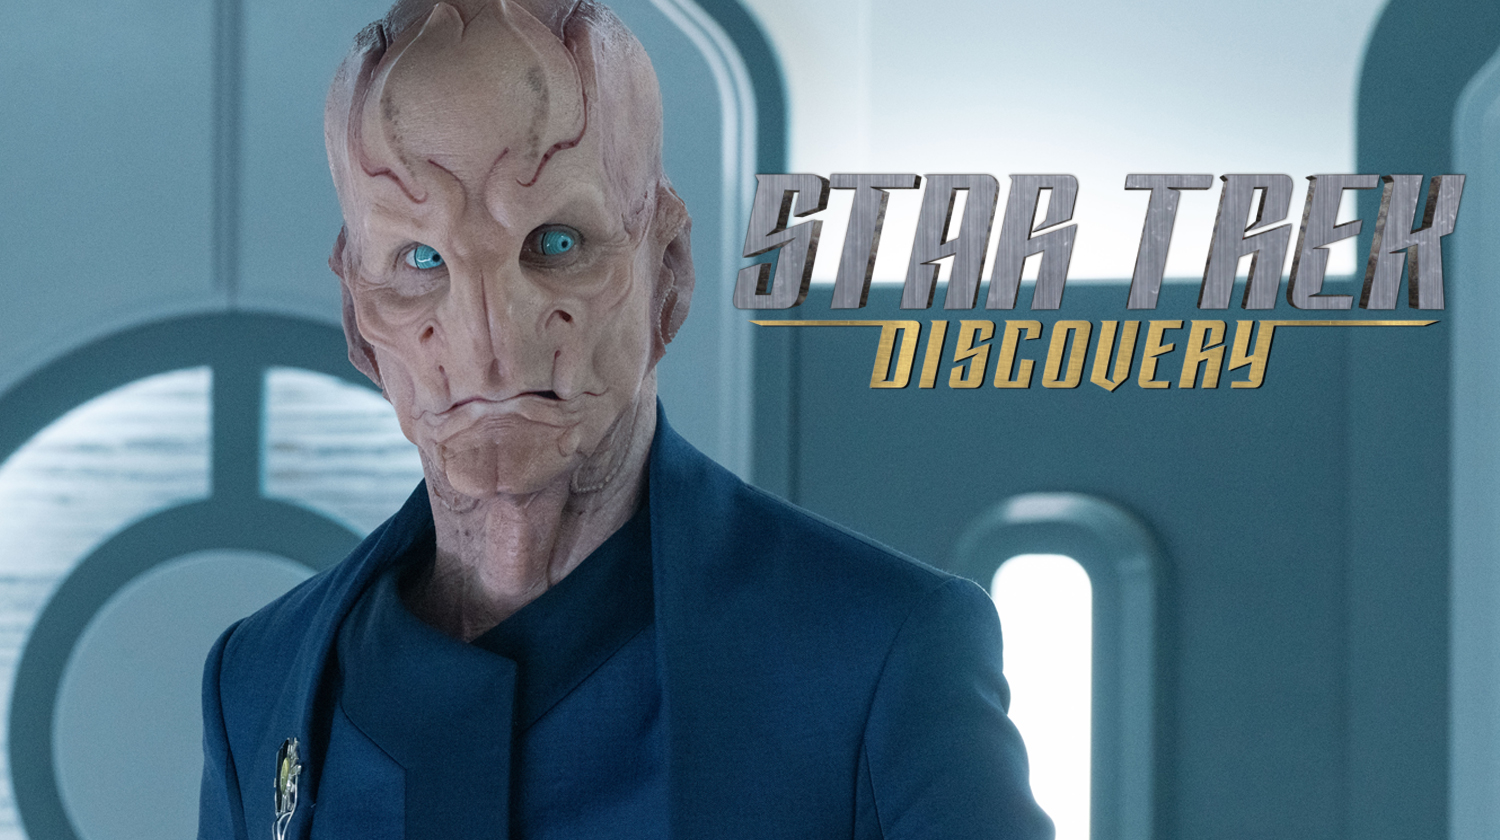 ‘Star Trek: Discovery’ season 5 episode 9 offers a tense but questionable cliffhanger Space